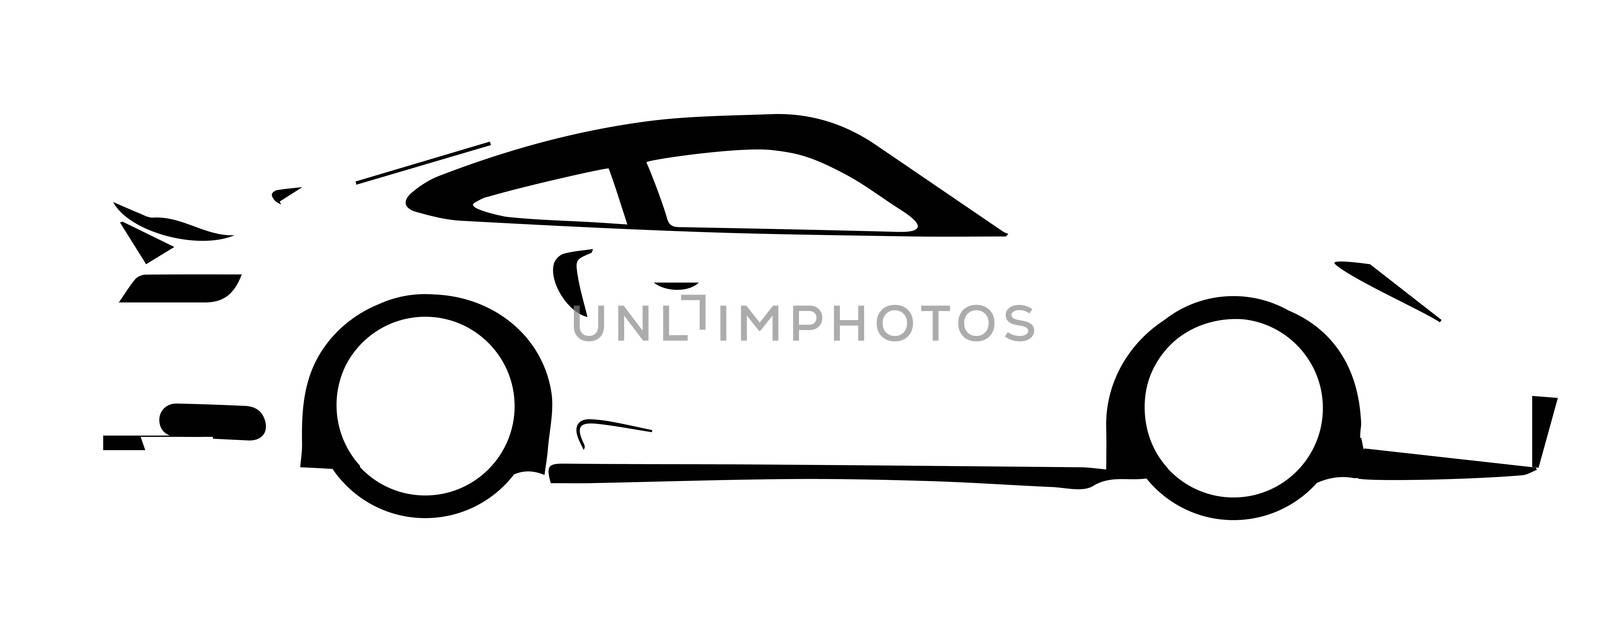 A fast car in silhouette over a white background